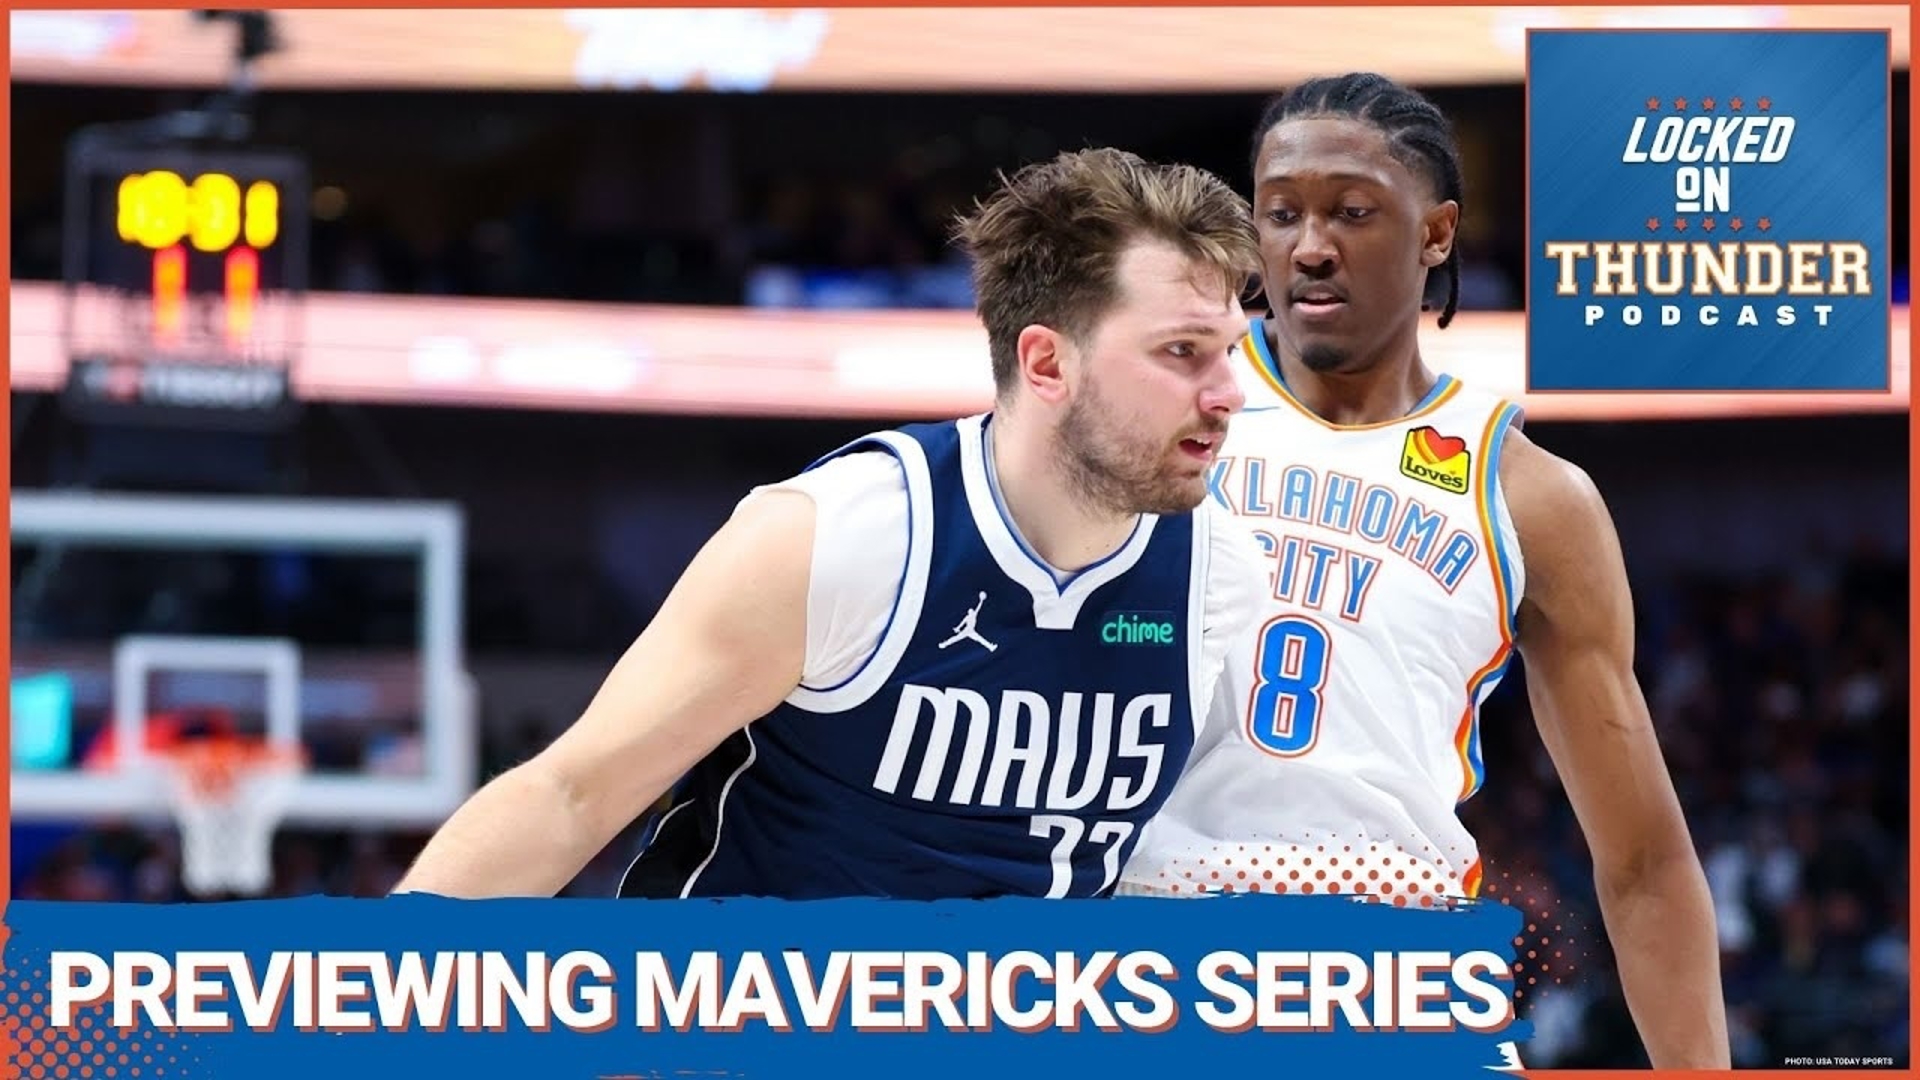 The Oklahoma City Thunder draw the Dallas Mavericks in the first round of the NBA Playoffs.